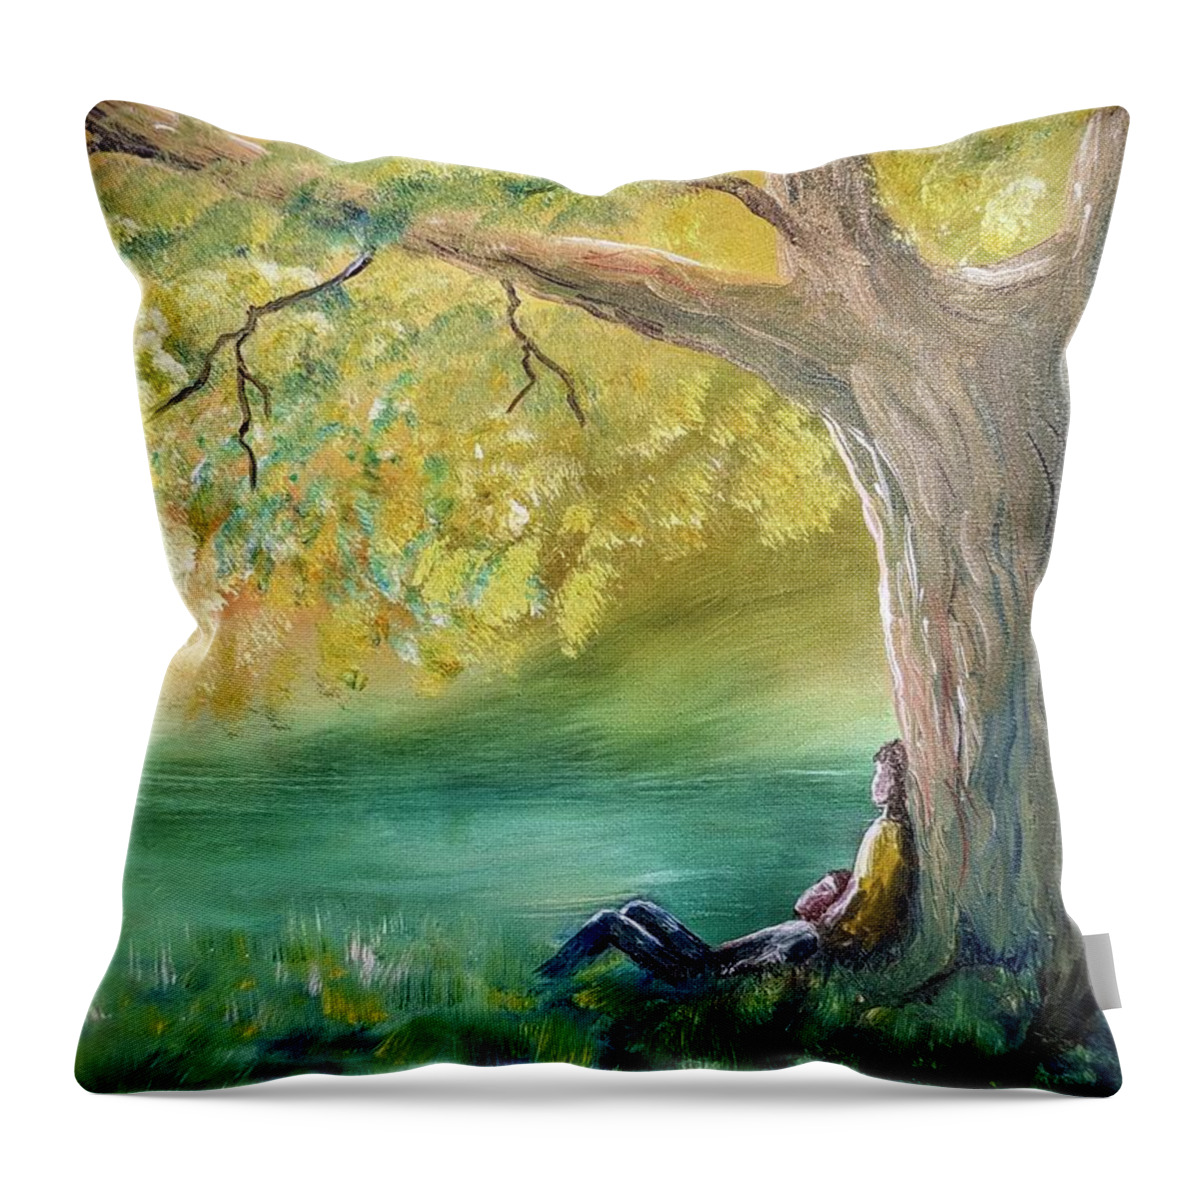 Couple Throw Pillow featuring the painting Summer Tree by Evelyn Snyder